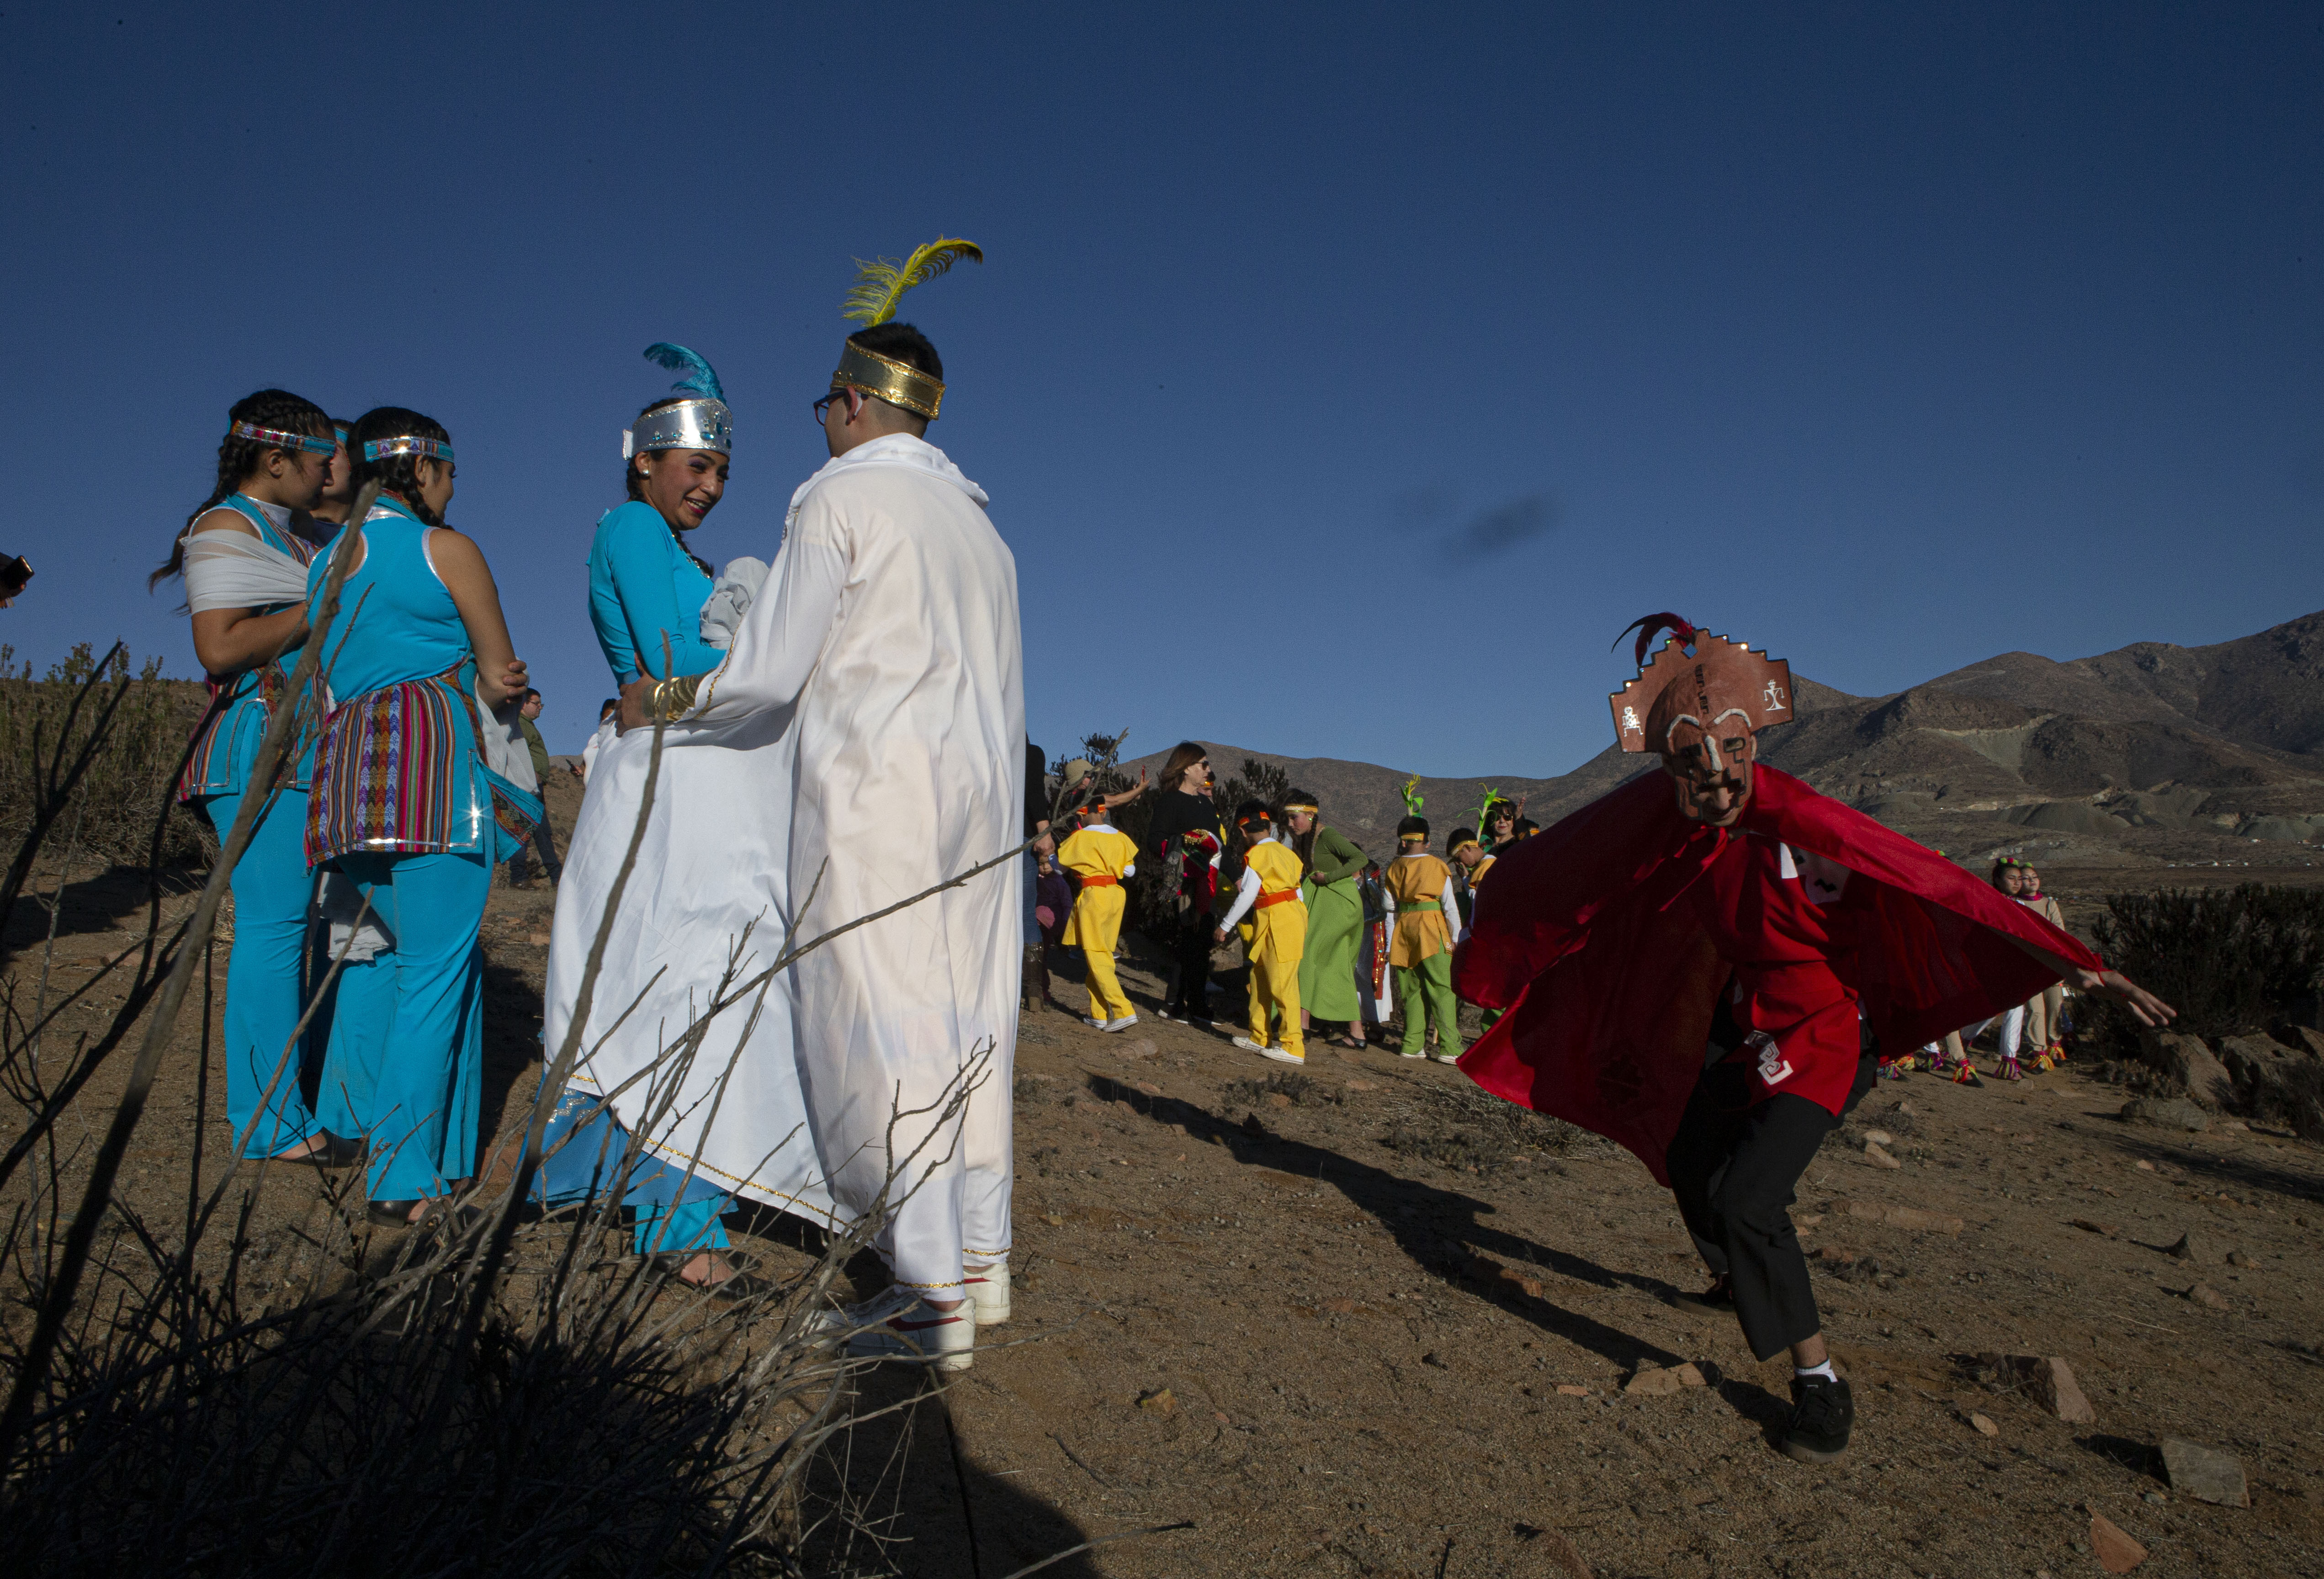 Youths dressed a Diaguitas indigenous people arrive to take part in a photo session before tomorrow's total solar eclipse in La Higuera, Chile, Monday, July 1, 2019. Tourists and scientists will gather in northern Chile, one of the best places in the world to watch the next the eclipse that will plunge parts of South America into darkness. (AP Photo/Esteban Felix)